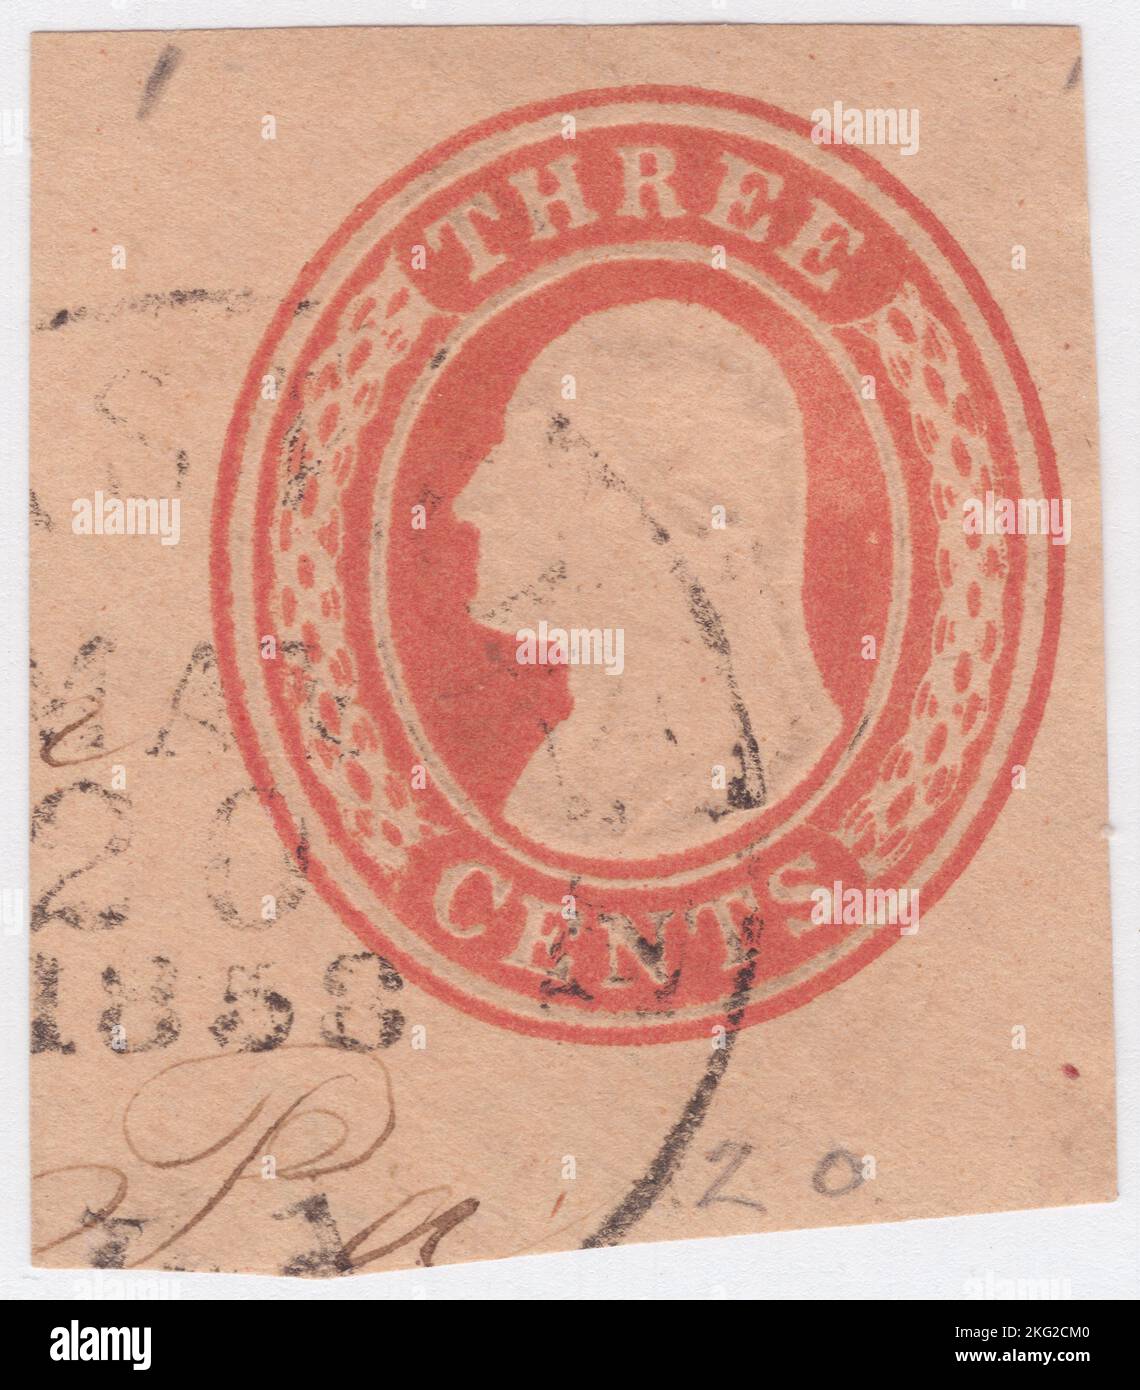 USA - 1854: Fragment of an original 3-cent stamped envelope, red on buff, stamp depicting a embossed portrait of George Washington. American military officer, statesman, and Founding Father who served as the first president of the United States from 1789 to 1797. Appointed by the Continental Congress as commander of the Continental Army, Washington led the Patriot forces to victory in the American Revolutionary War and served as the president of the Constitutional Convention of 1787, which created the Constitution of the United States and the American federal government Stock Photo